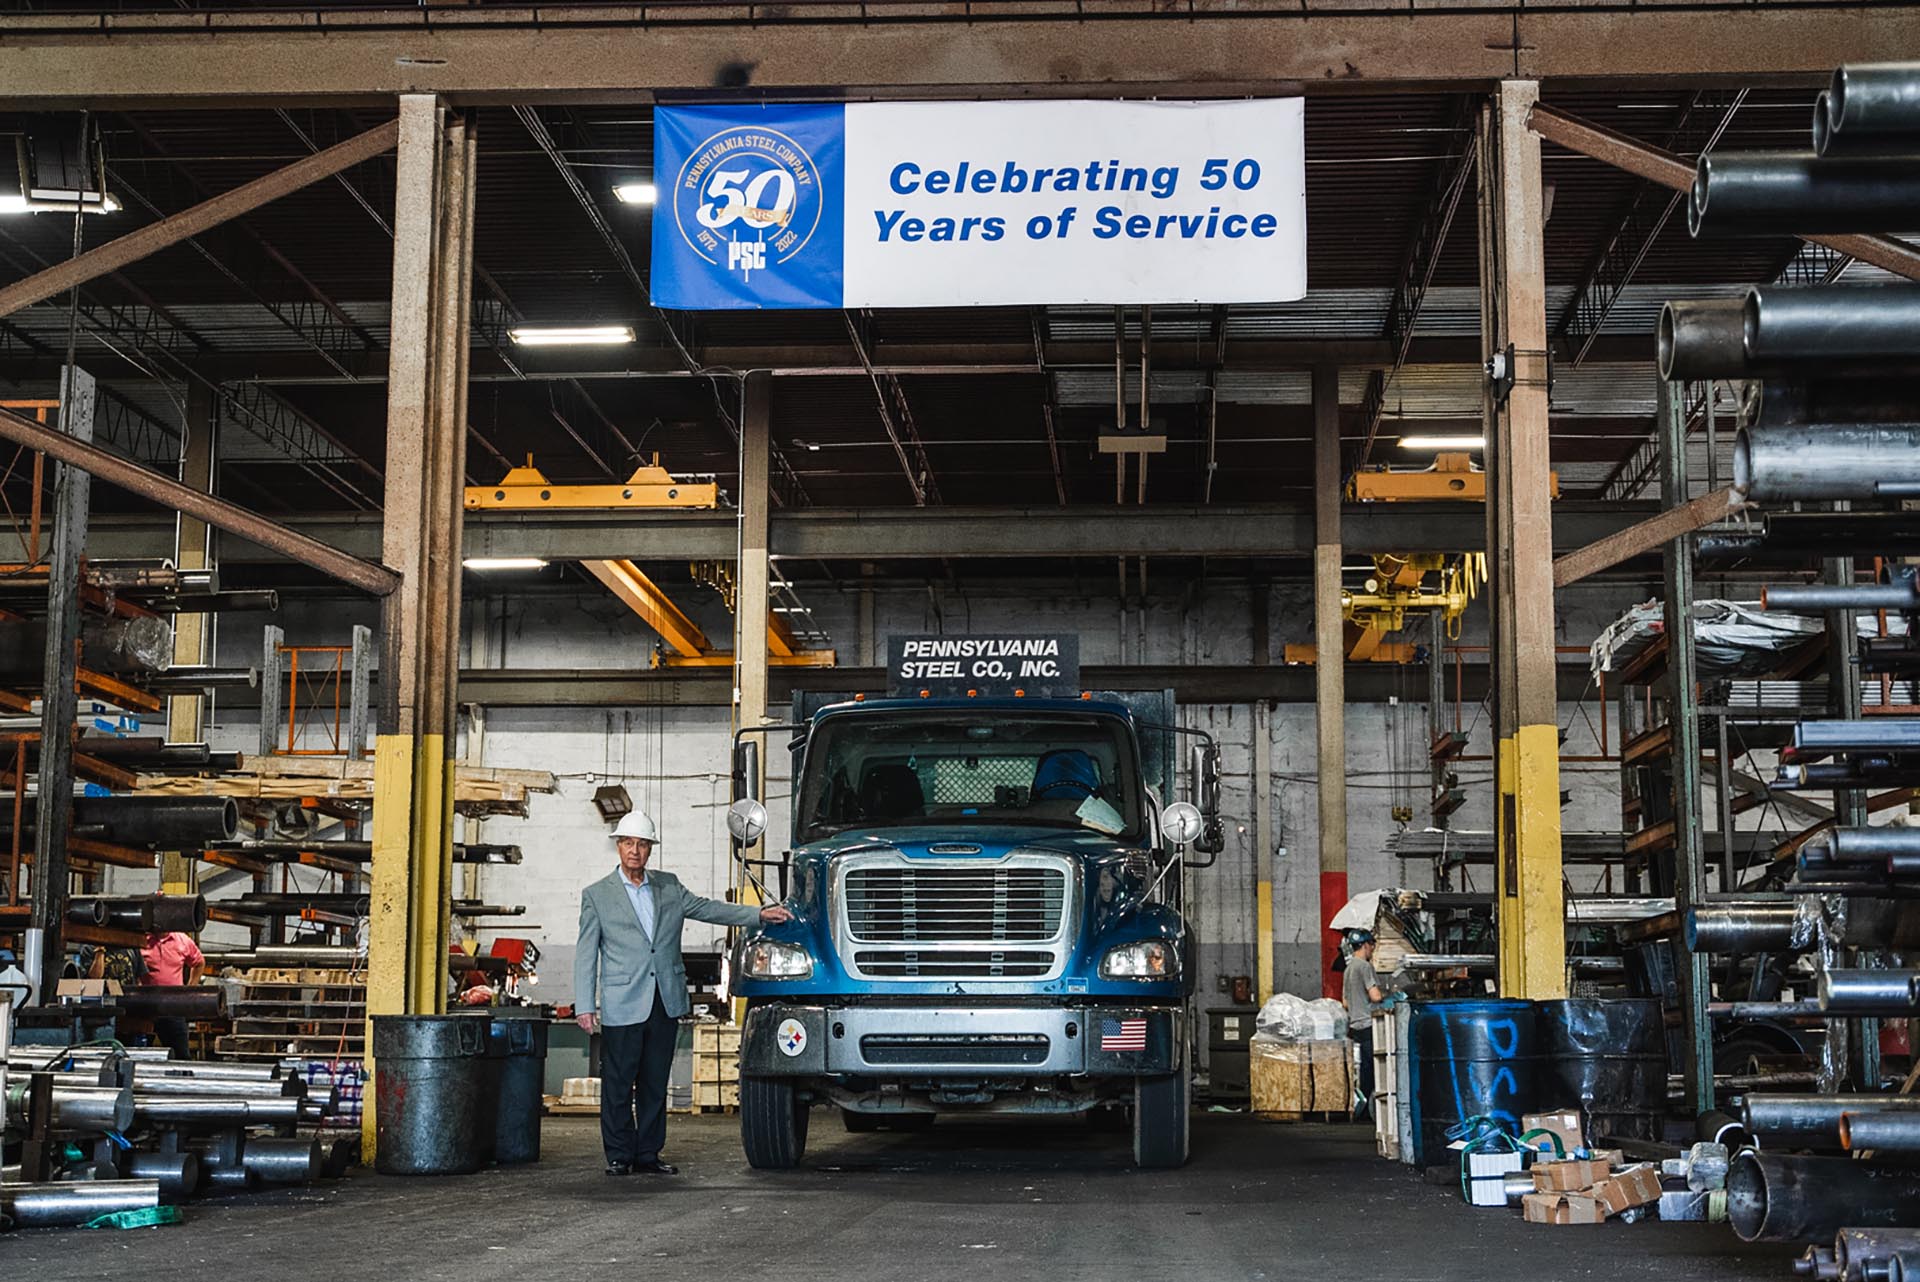 PA Steel truck in warehouse with banner reading "Celebrating 50 years of service" hanging above it